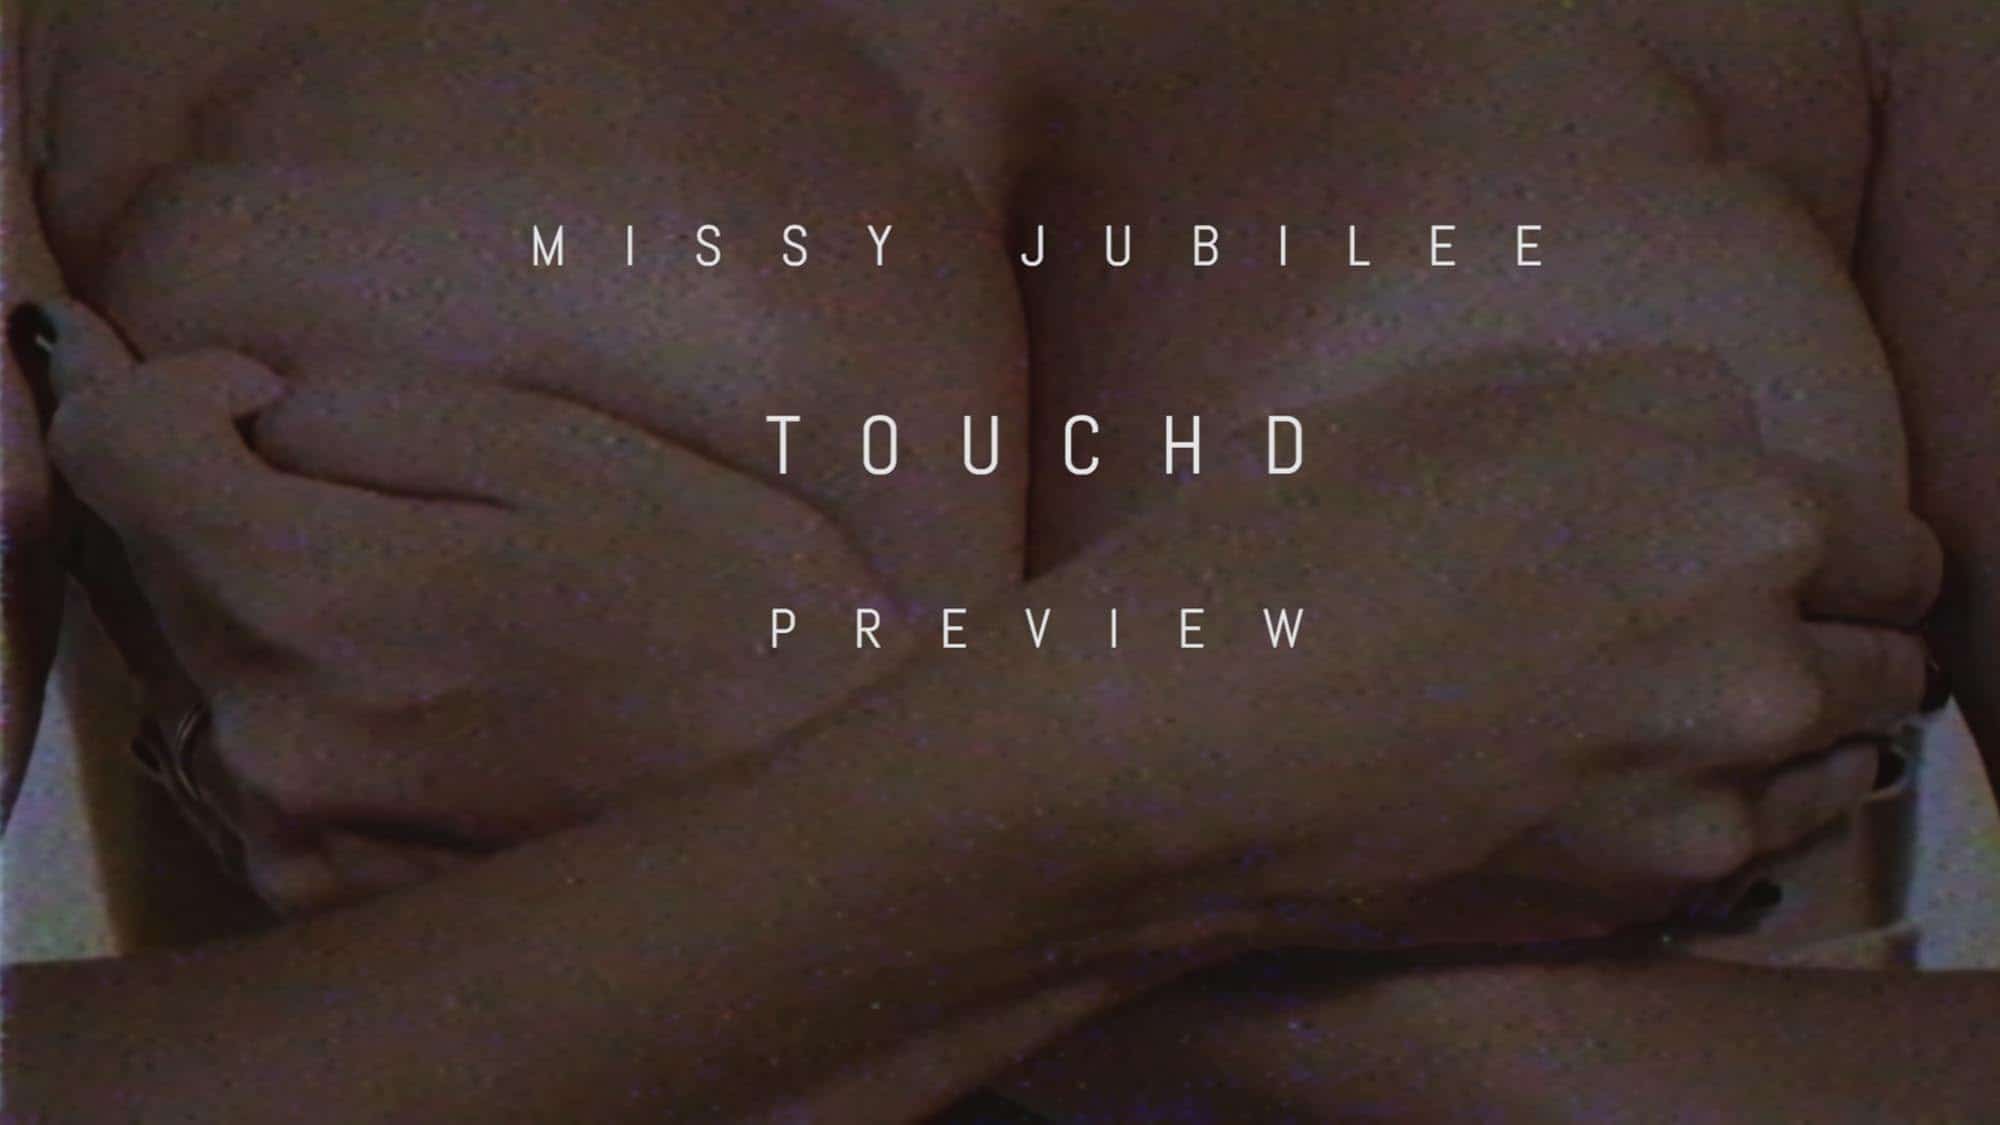 Missy Jubilee 102 TOUCHD PREVIEW